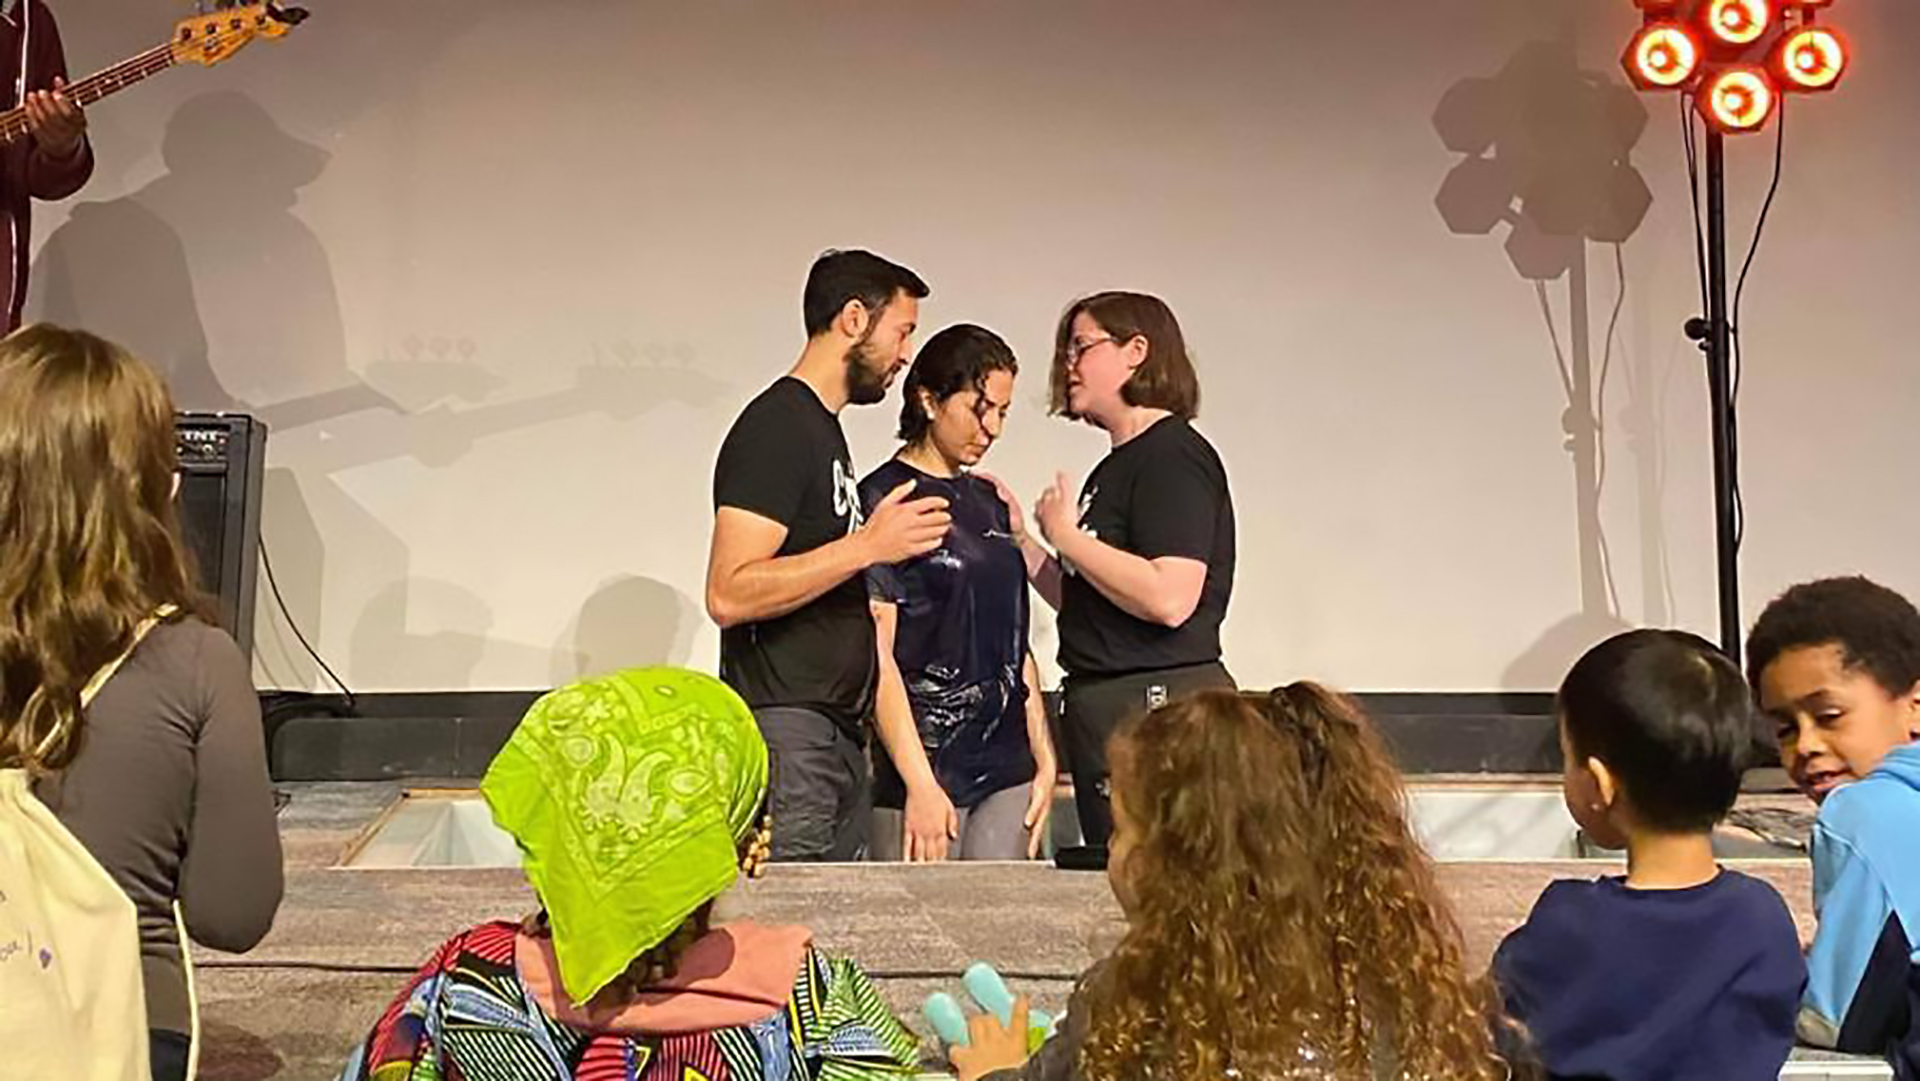 Annahita was baptized in the church Diana and the Pioneer Team partnered with in Amsterdam.